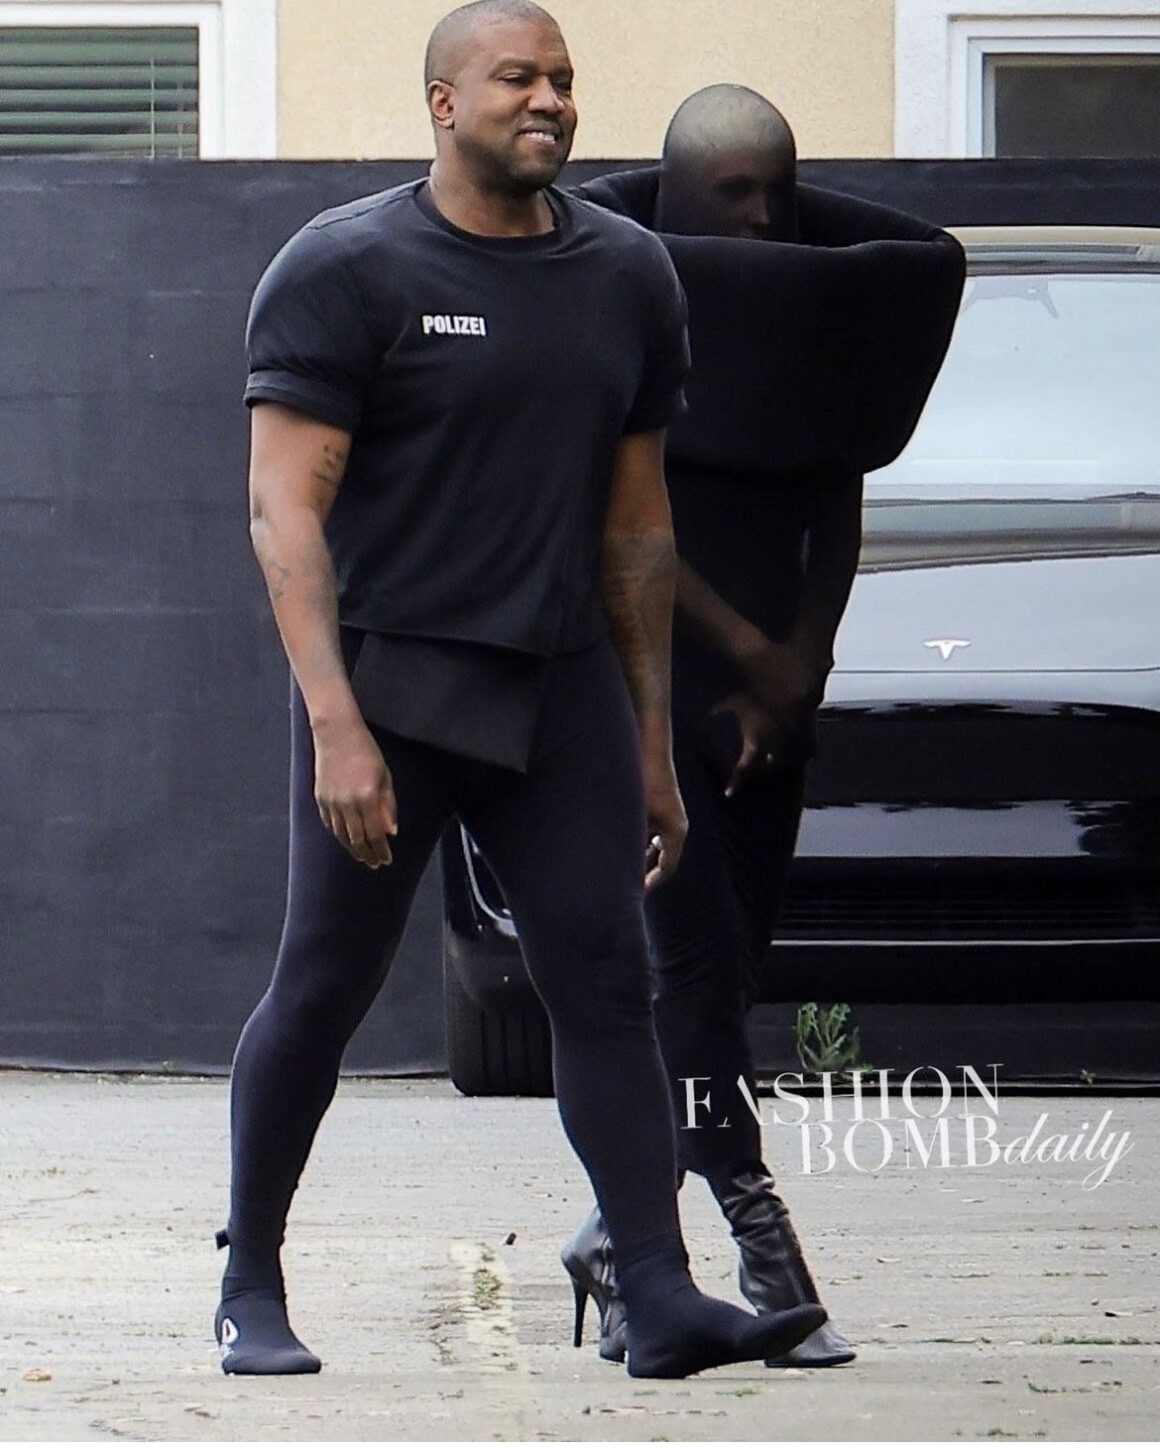 Kanye West Wore His Black Signature Vetements 'Polizei' Shirt and Leggings  with wife Bianca Censori Who Channeled Maison Margiela – Fashion Bomb Daily